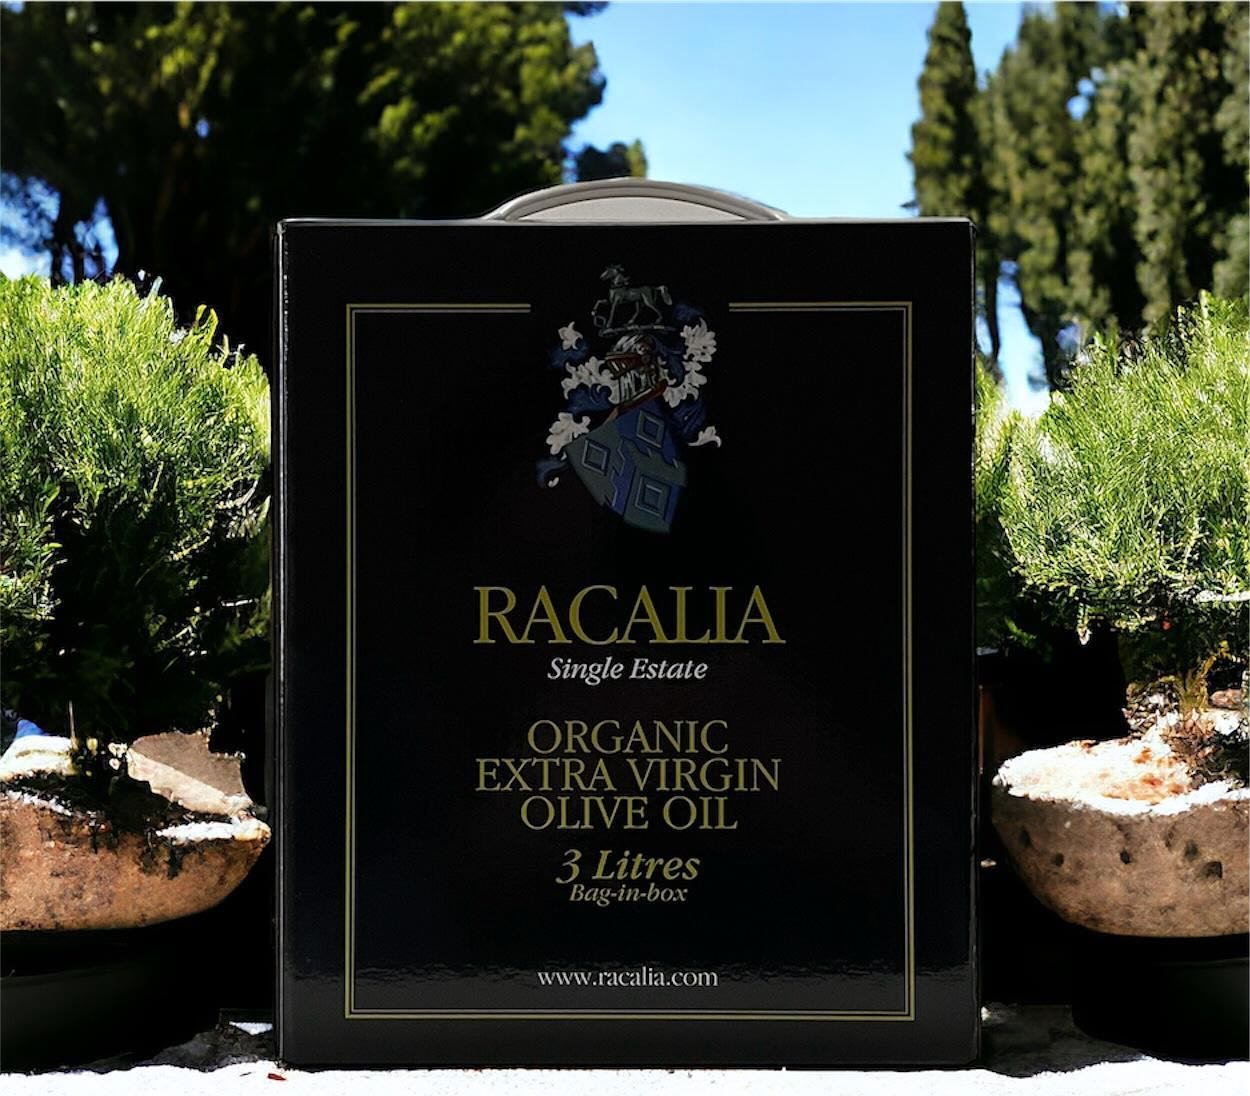 Our 3L box.
This was our first product when we launched in the UK in 2004.
It&rsquo;s still our biggest seller.

What an icon.
 
@racalia_olive_oil. #icondesign #baginbox #treetotable #evoolovers #evoo #organicfood #healthgiving #bbcmichaelmosley #bb